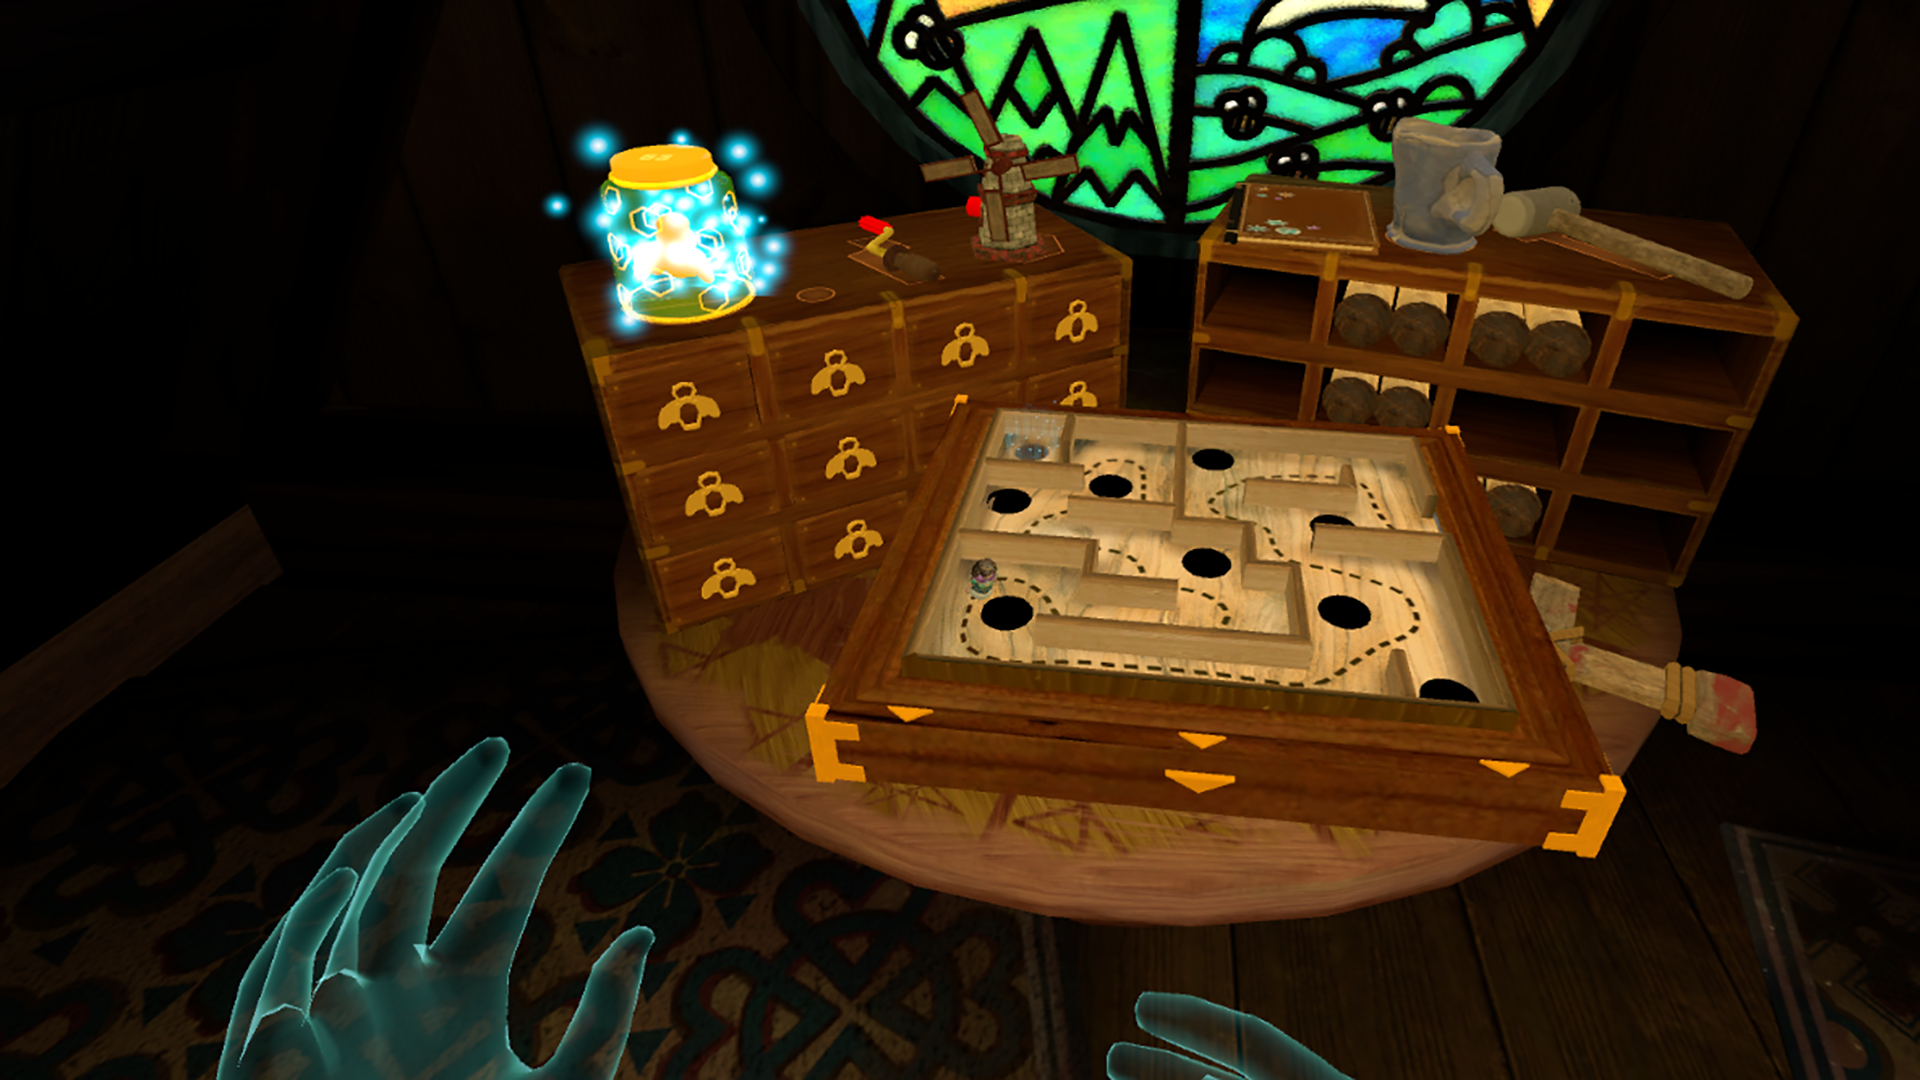 A screenshot showing Guinevere travelling through a wooden labyrinth on the game board.